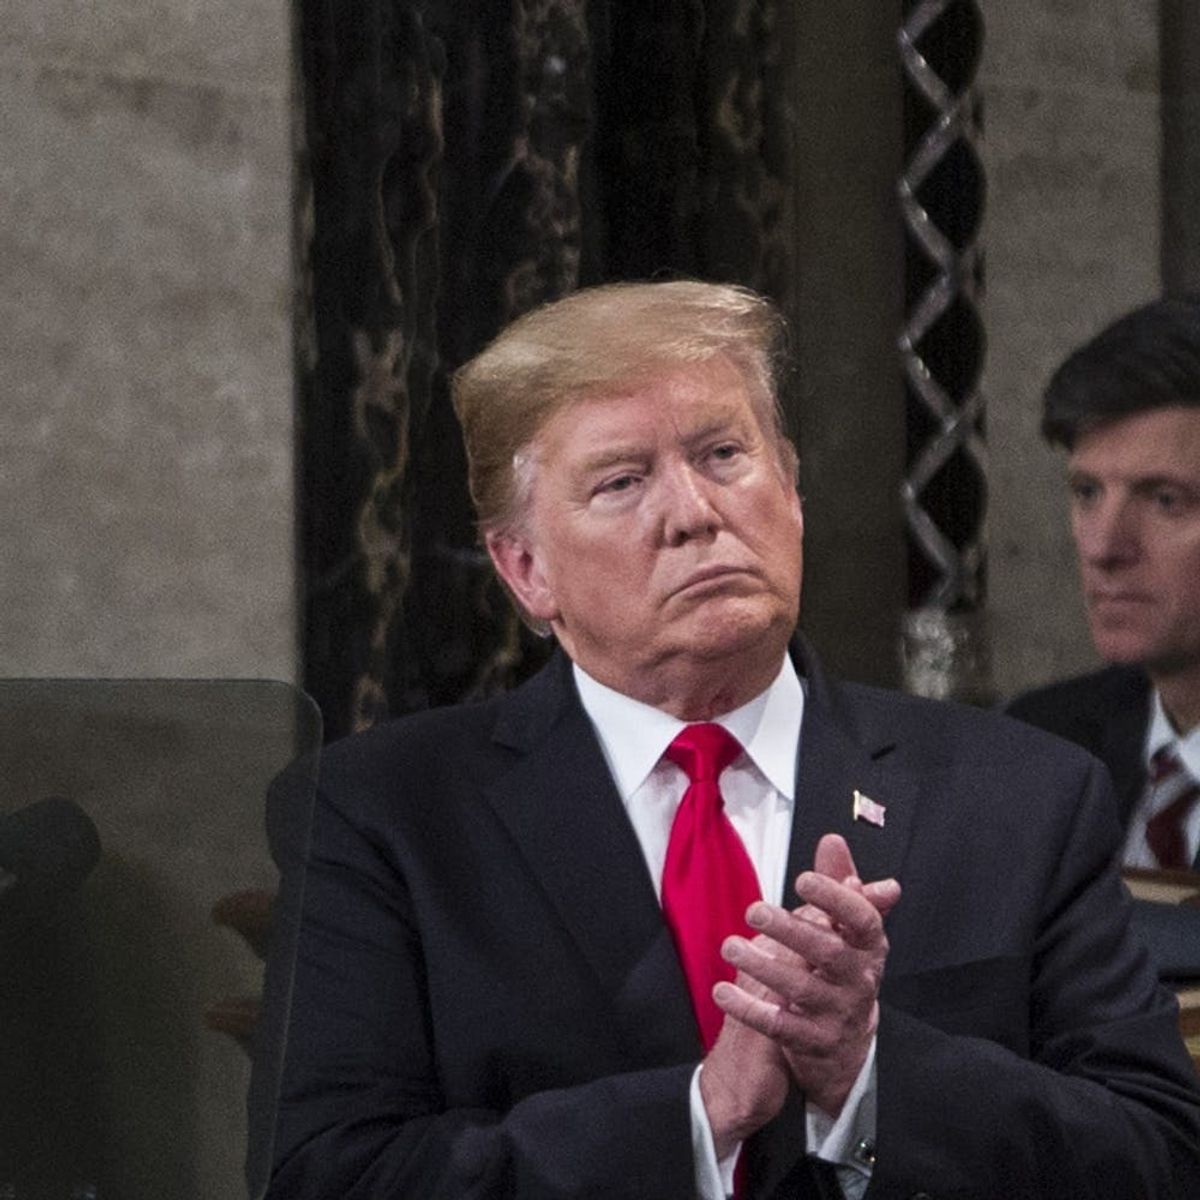 The 3 Key Takeaways from Trump’s 2019 State of The Union Address